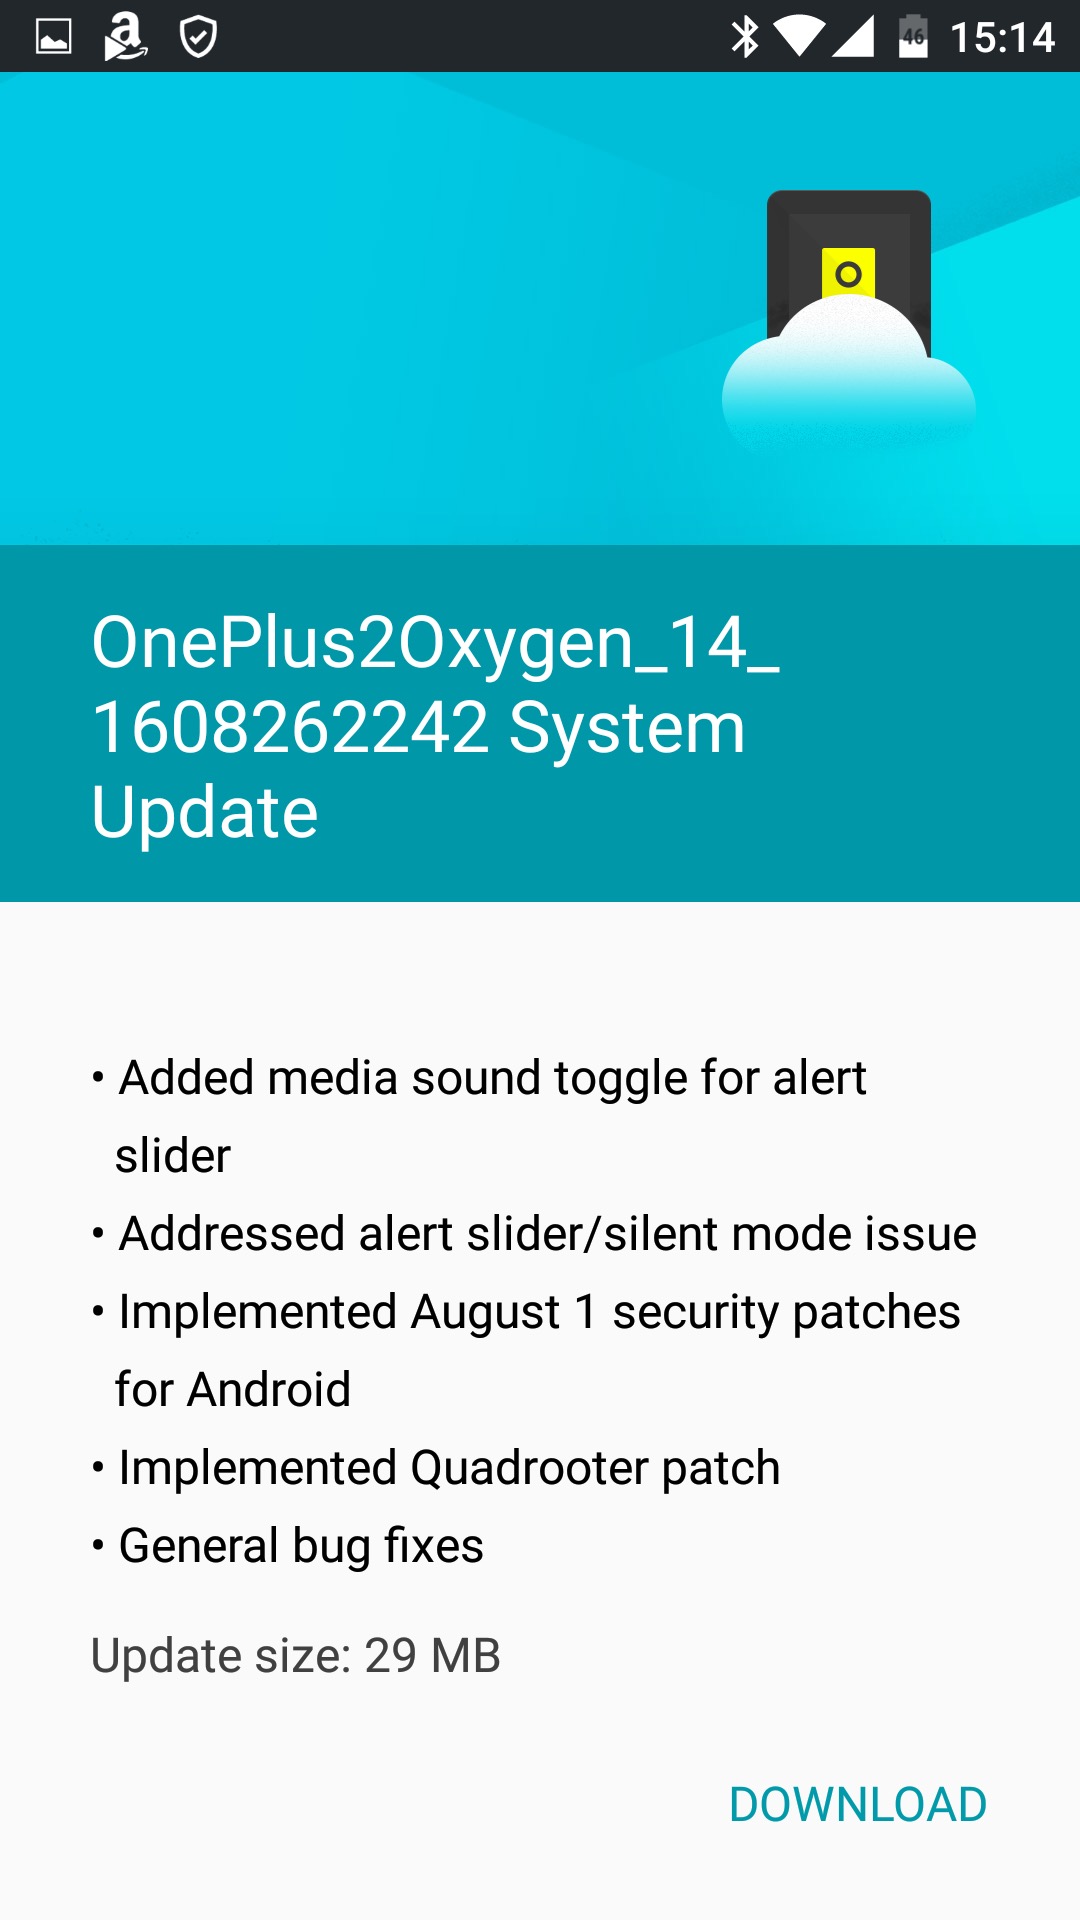 OnePlus Two gets updates